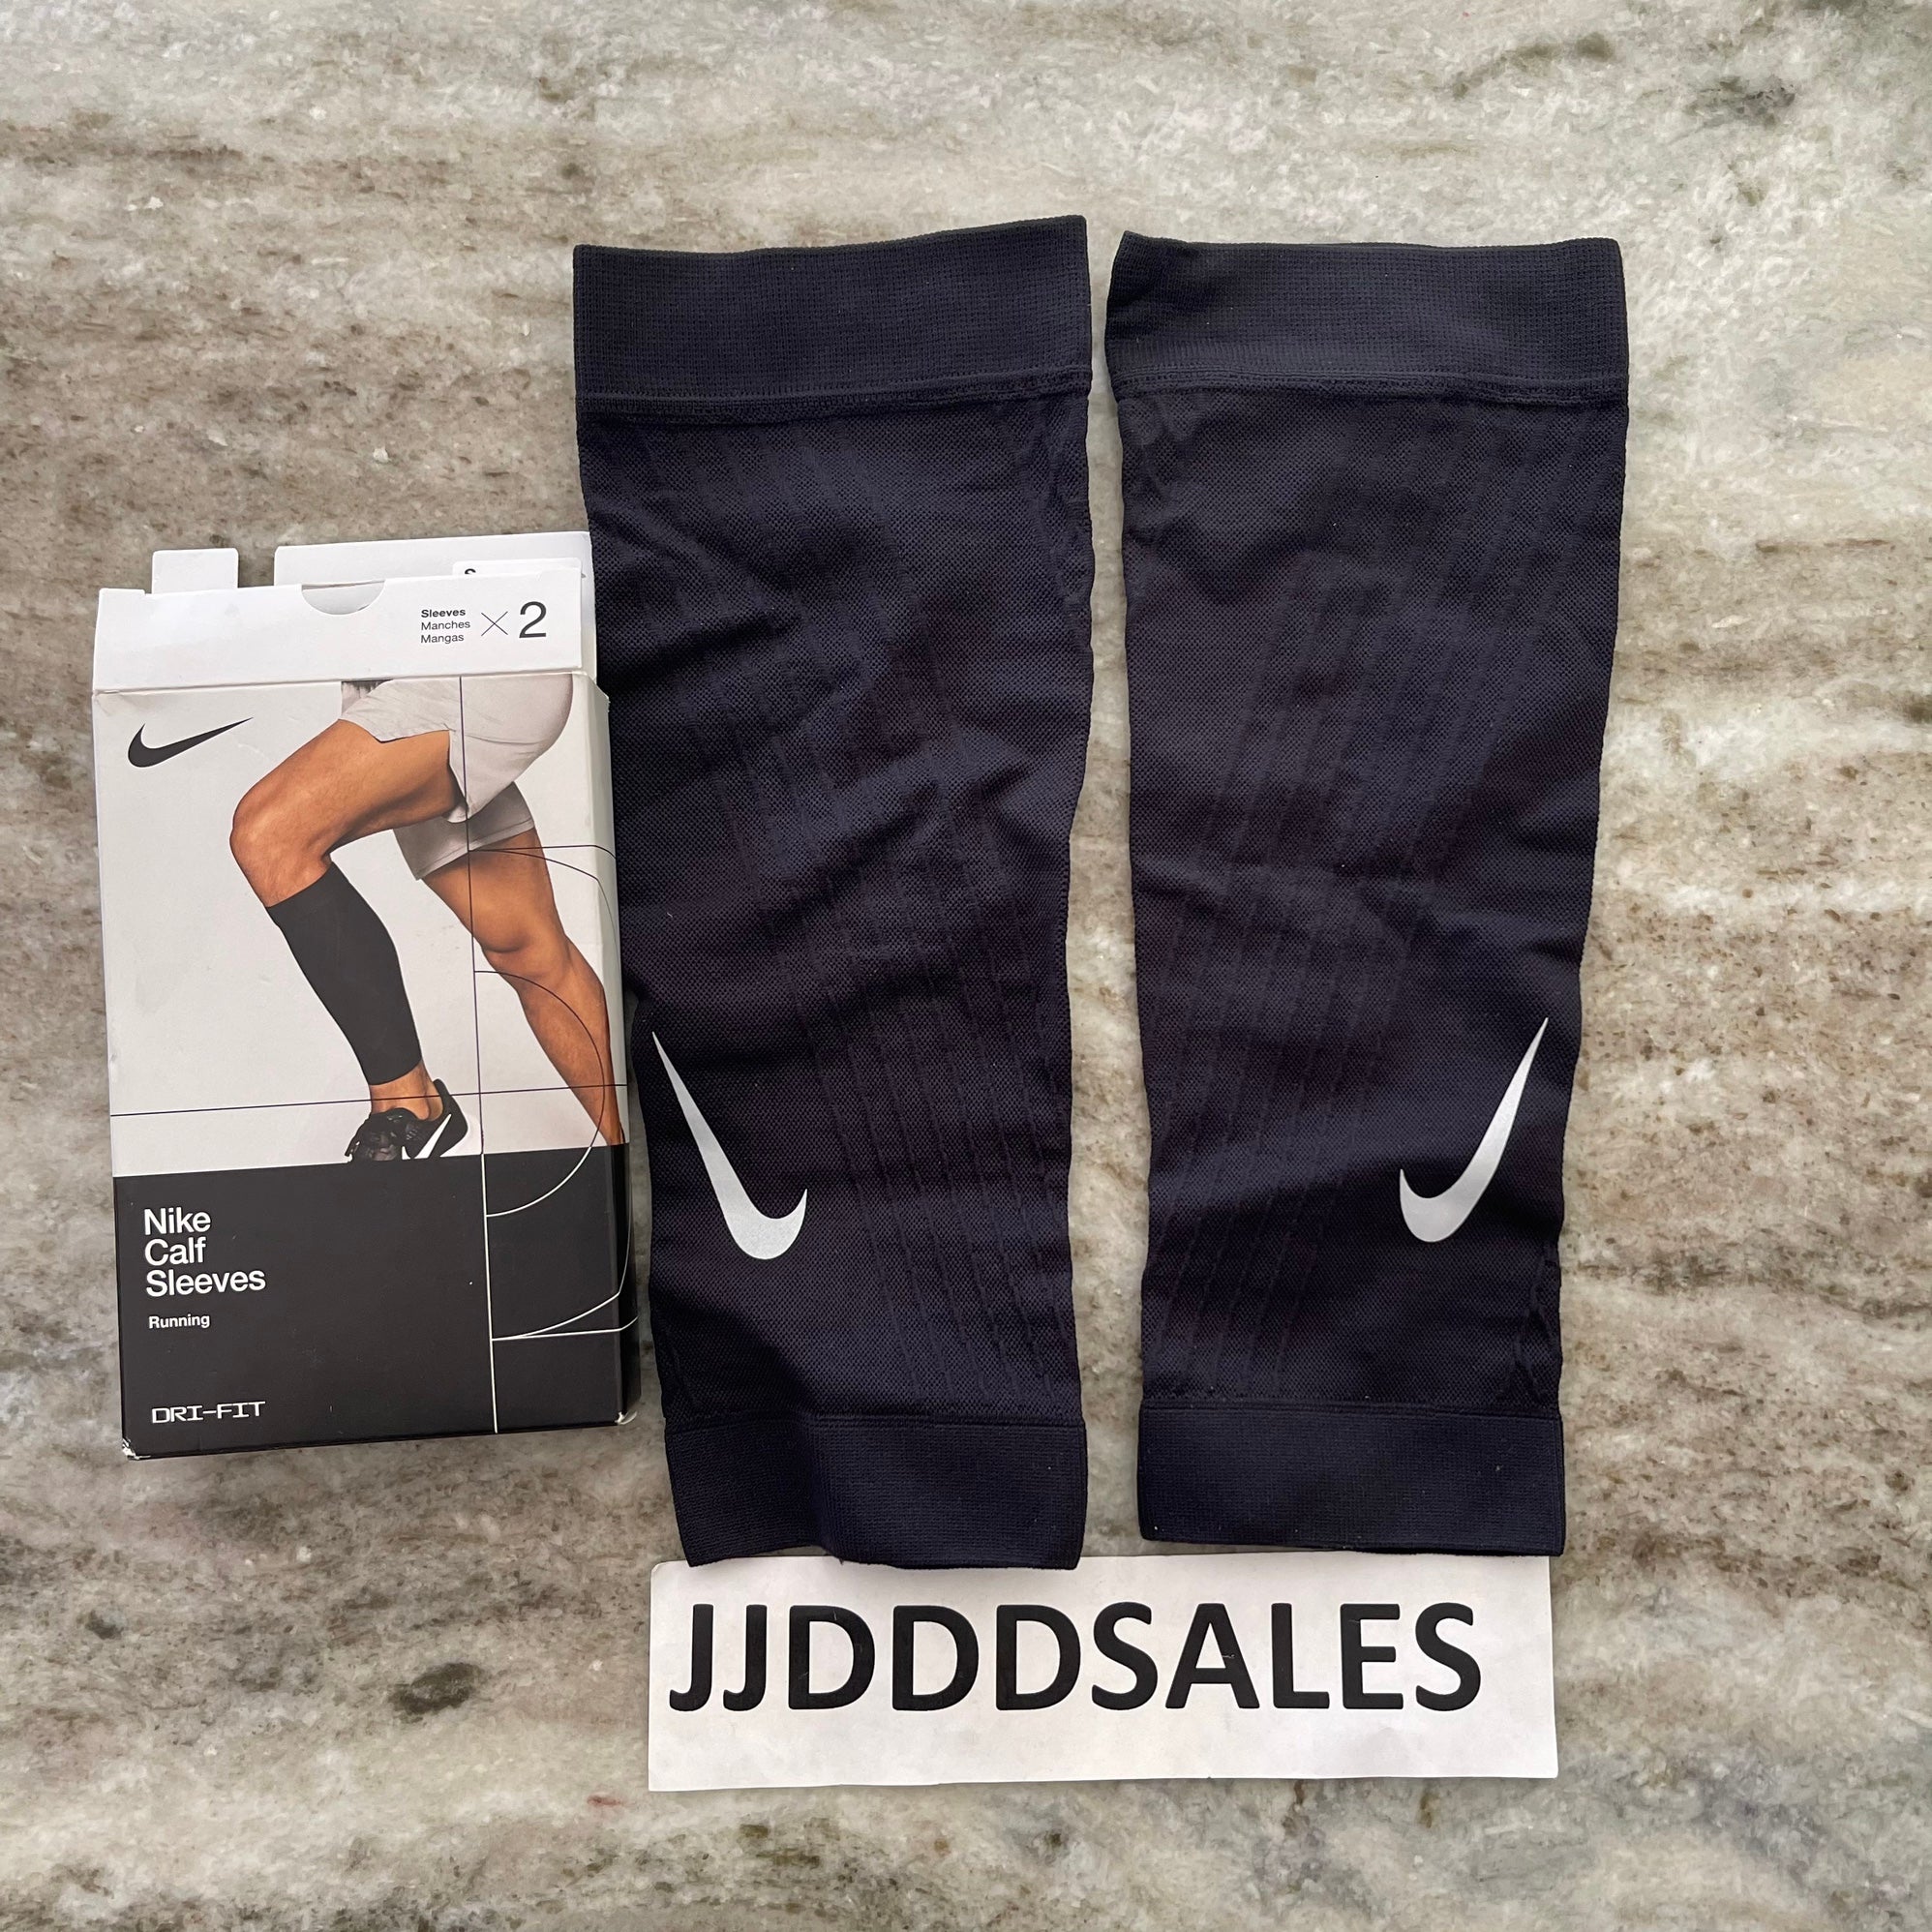 NEW Nike Calf Sleeves Dri Fit Black Running Unisex Size Small $50 New in  Box